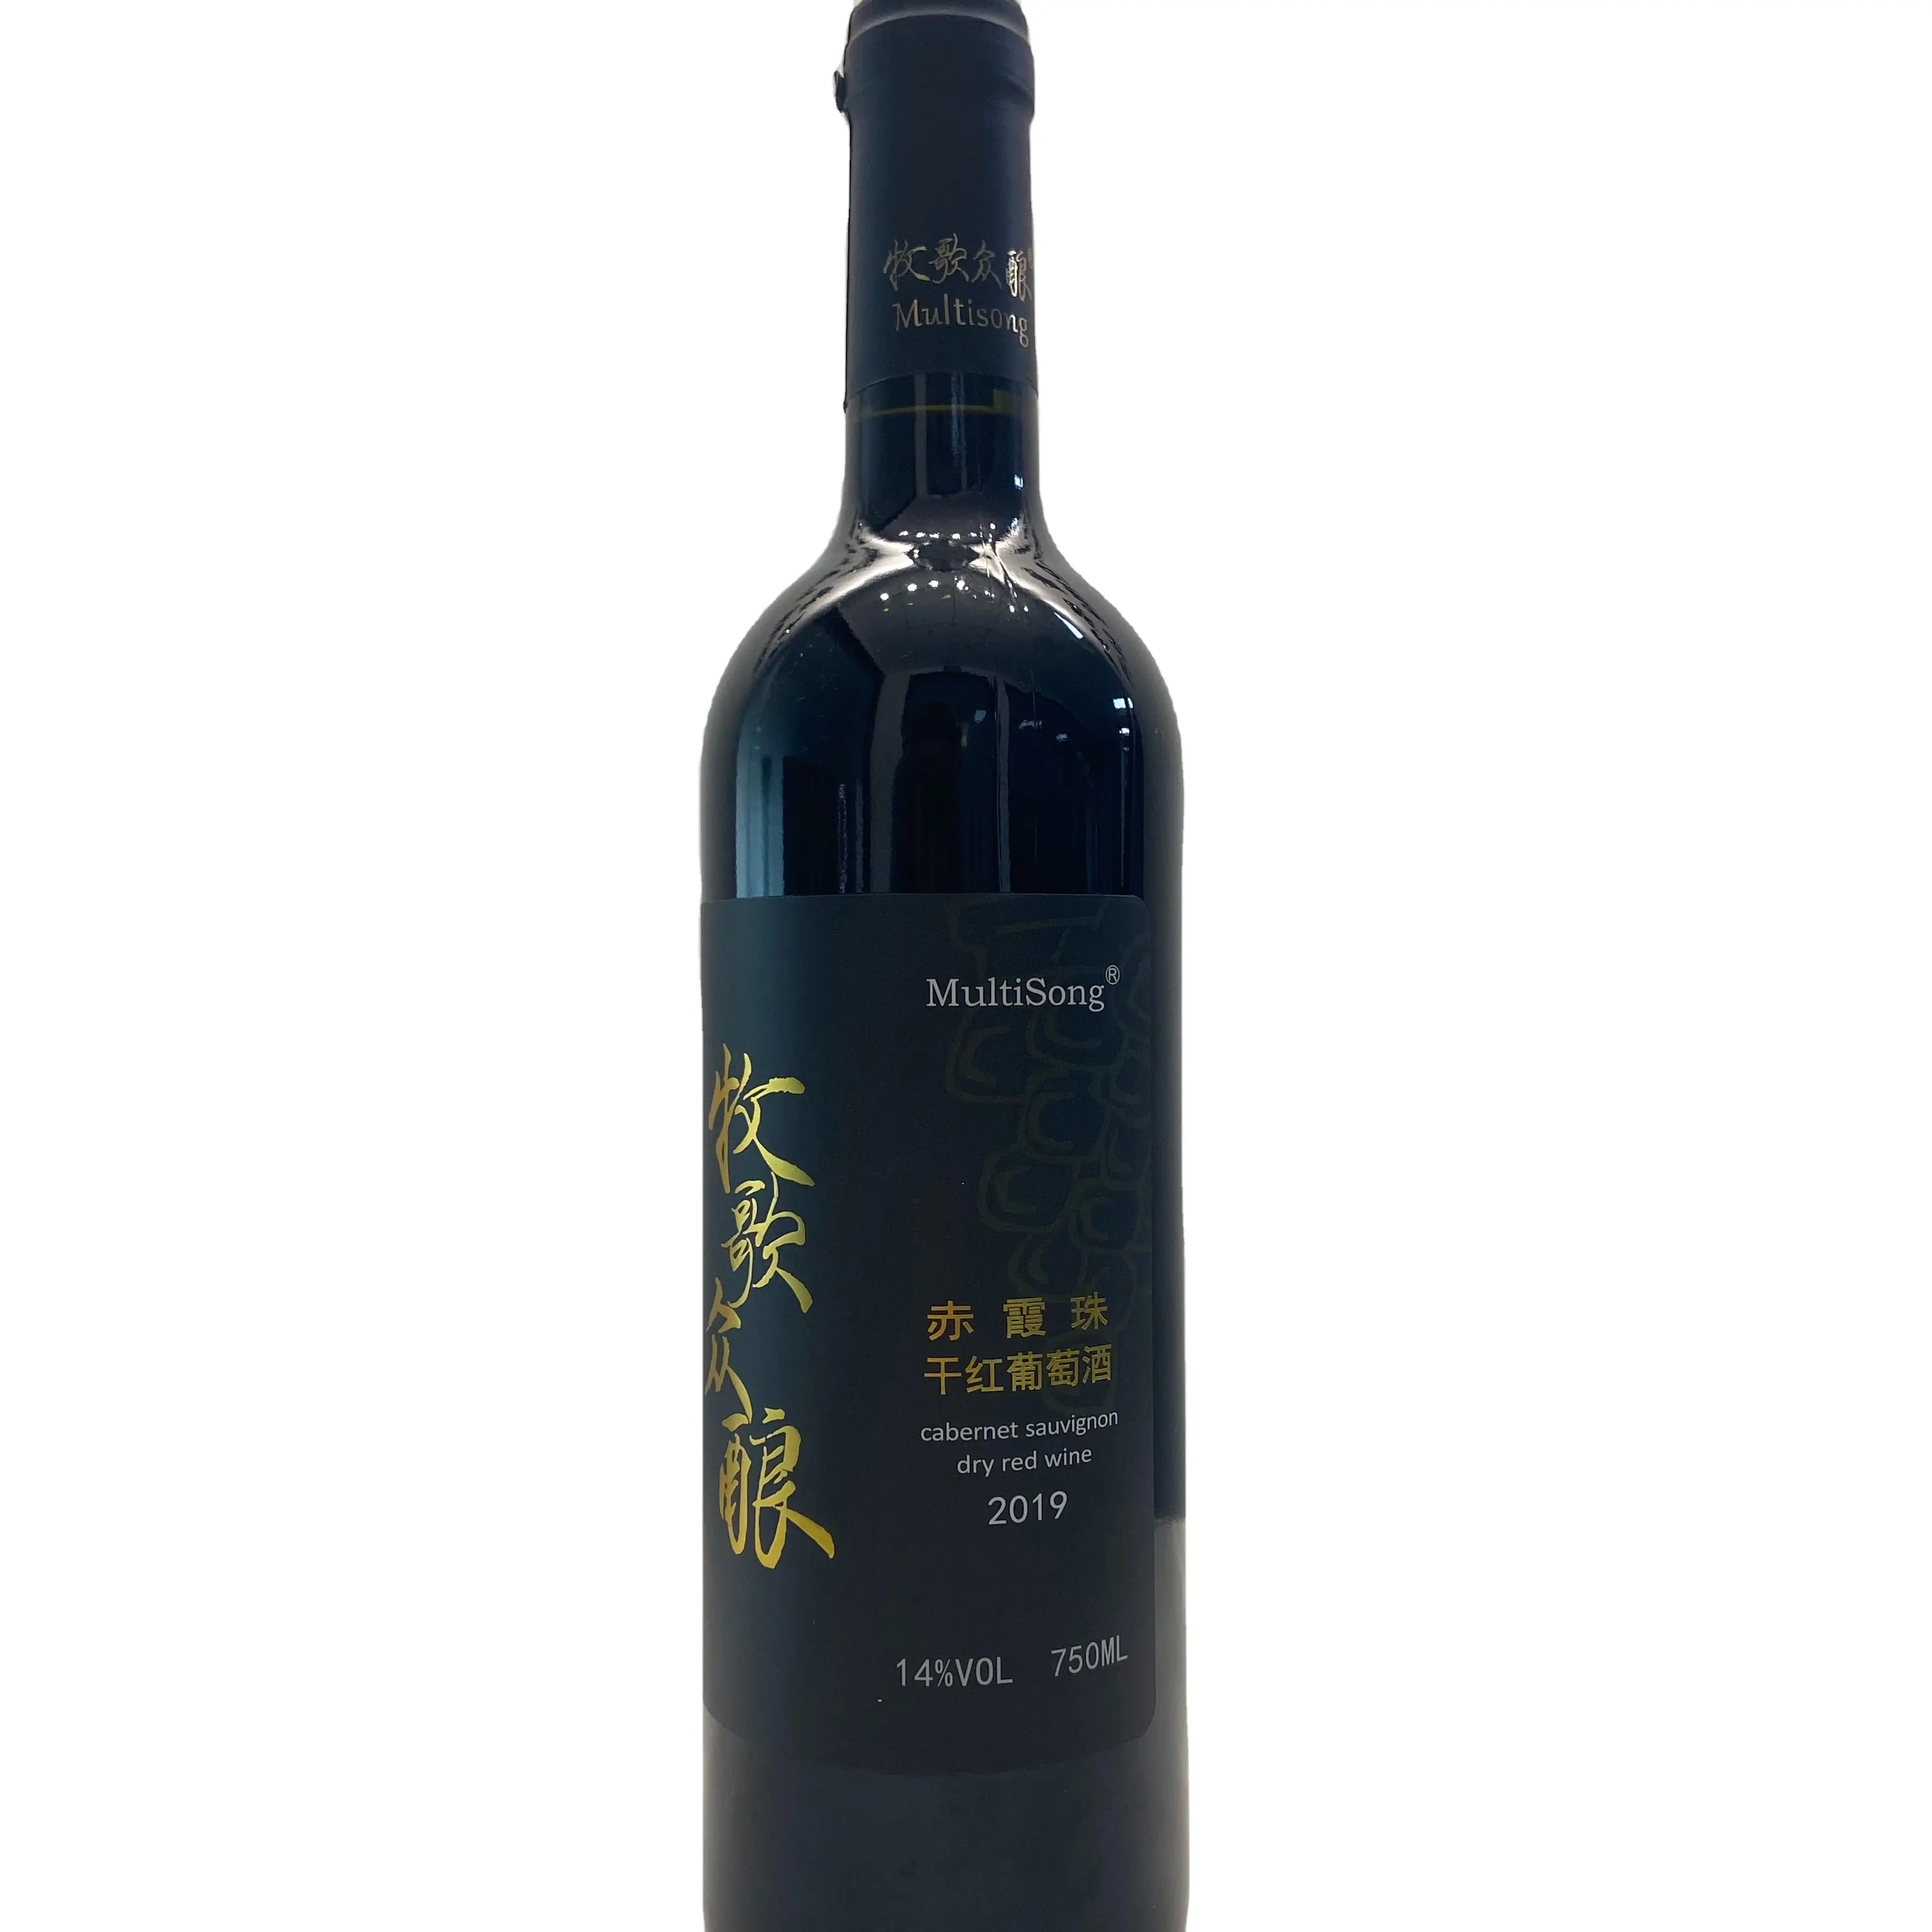 top quality dry red wine cabernet made in china by Mulitsong